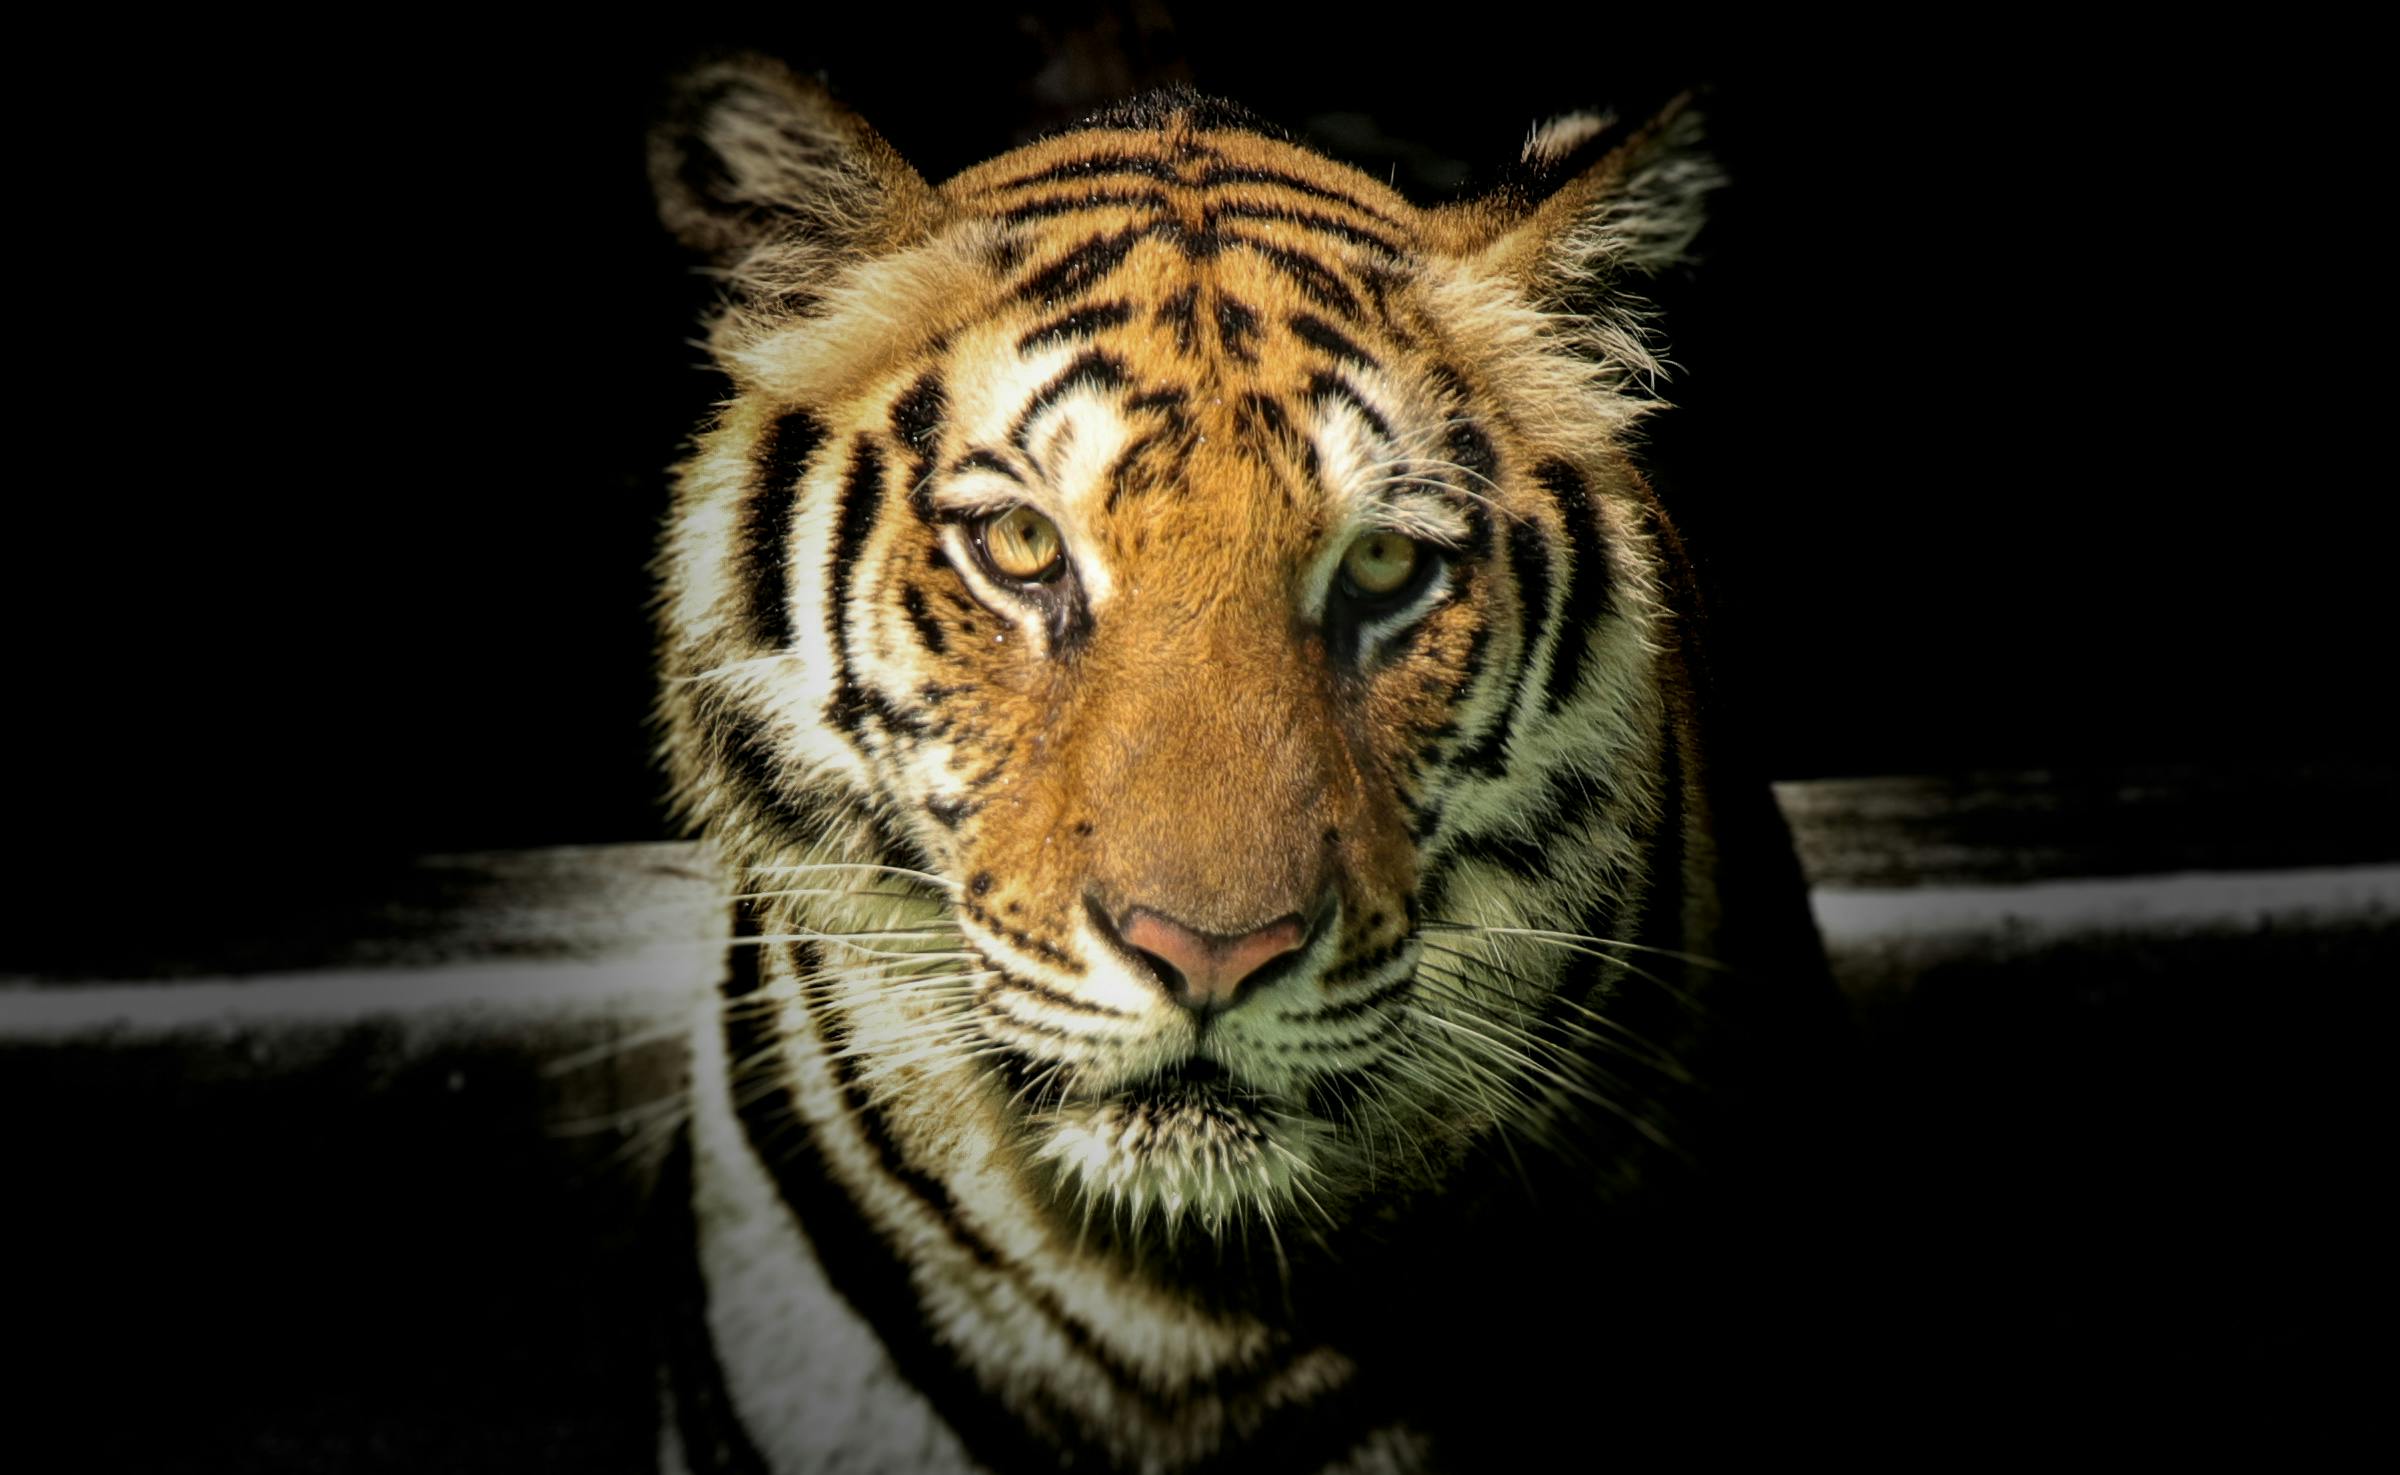 Tiger Wallpaper Stock Photos, Images and Backgrounds for Free Download